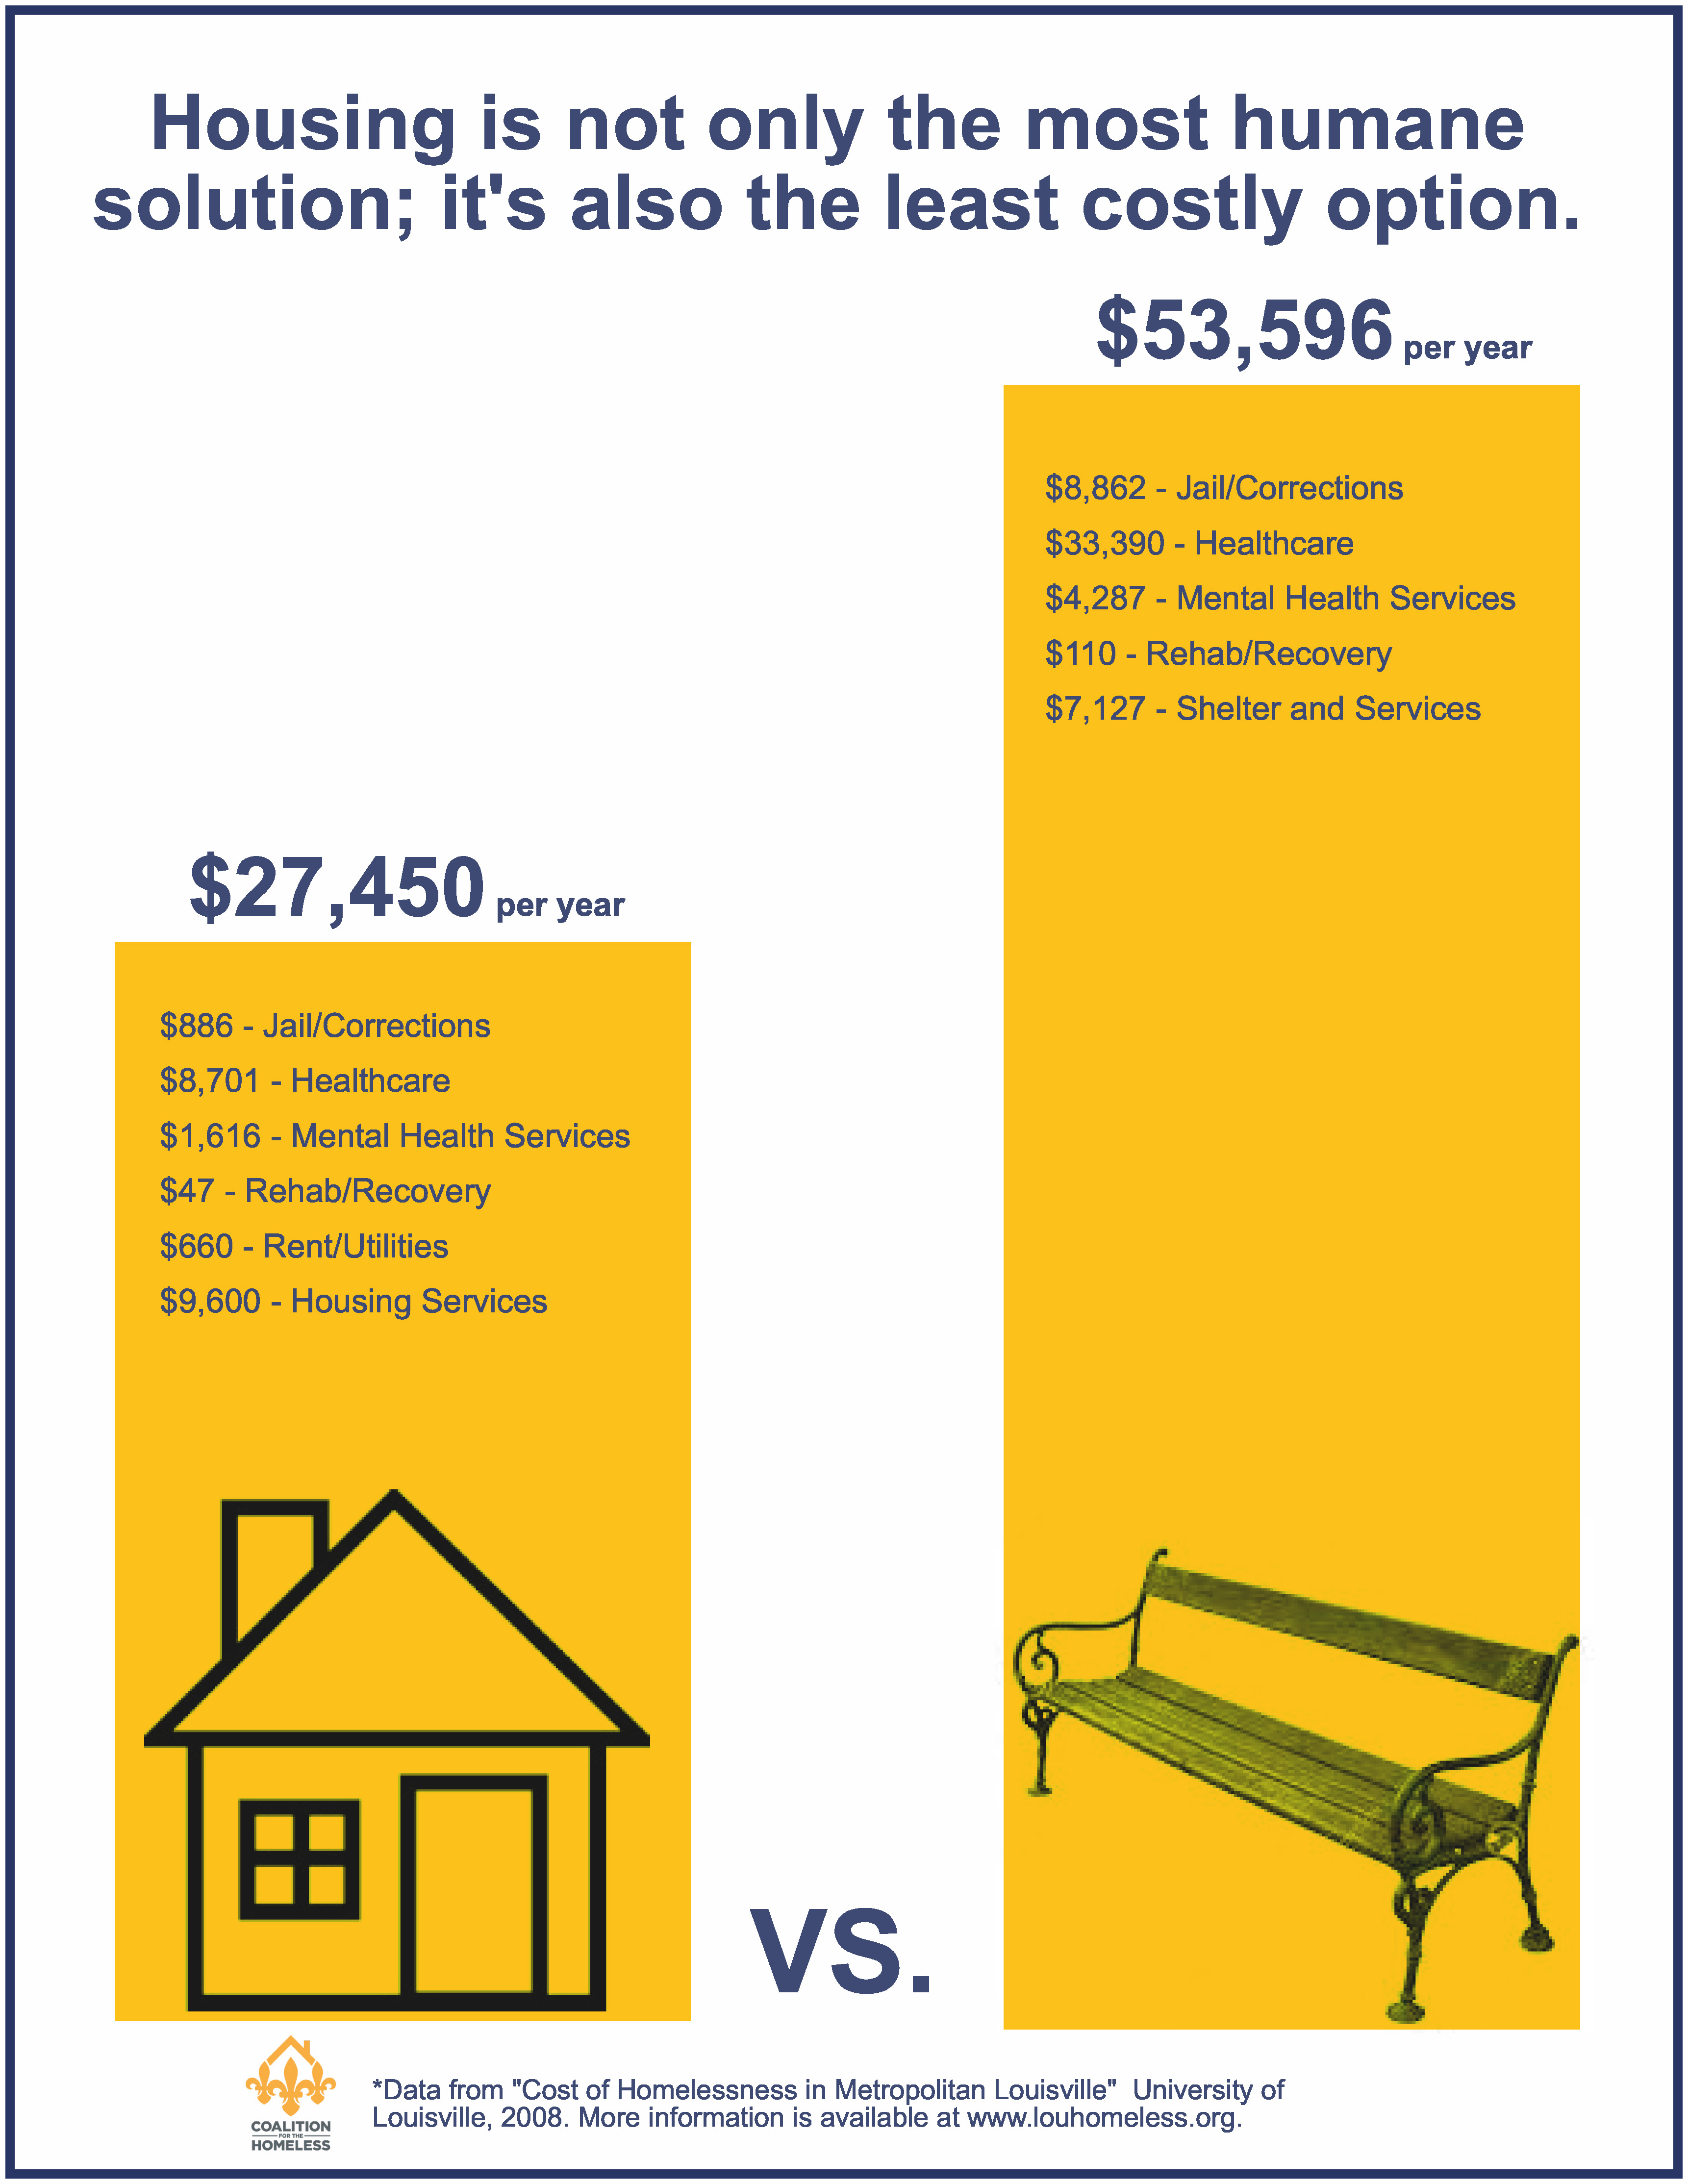 The Cost of Housing vs Homelessness